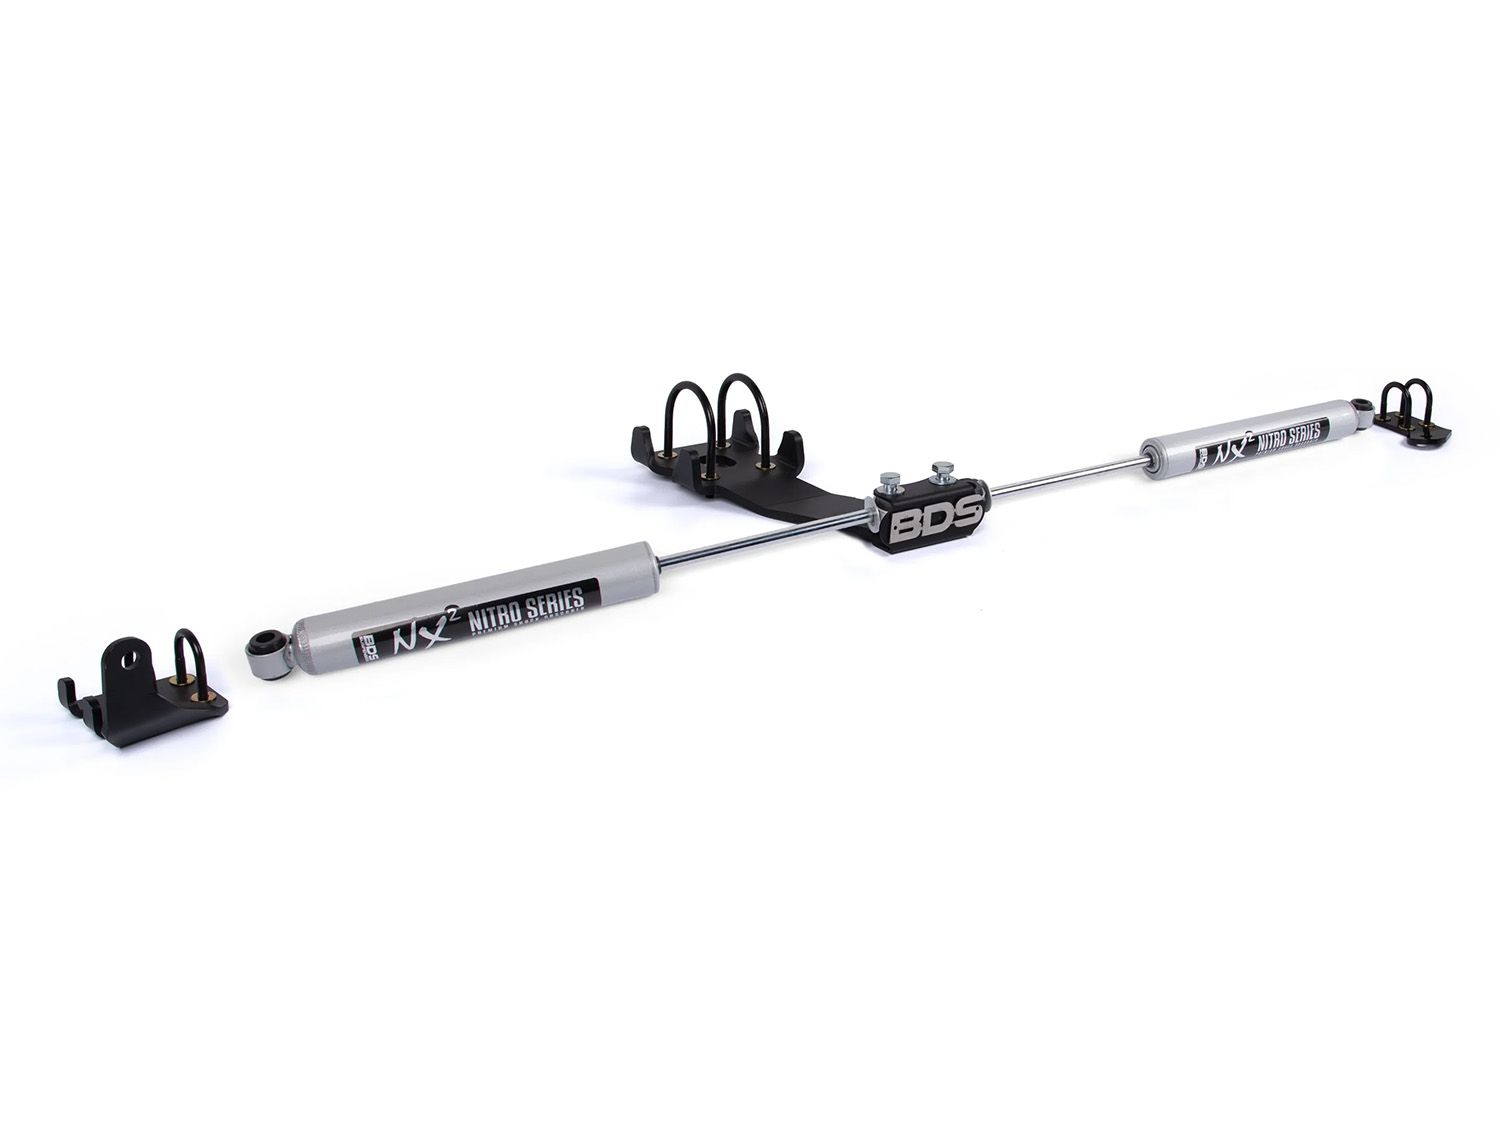 Ram 2500 / 3500 1994-2008 Dodge 4WD (w/3" Axle tube & Y-Style Steering) - BDS NX2 Dual Steering Stabilizer by BDS